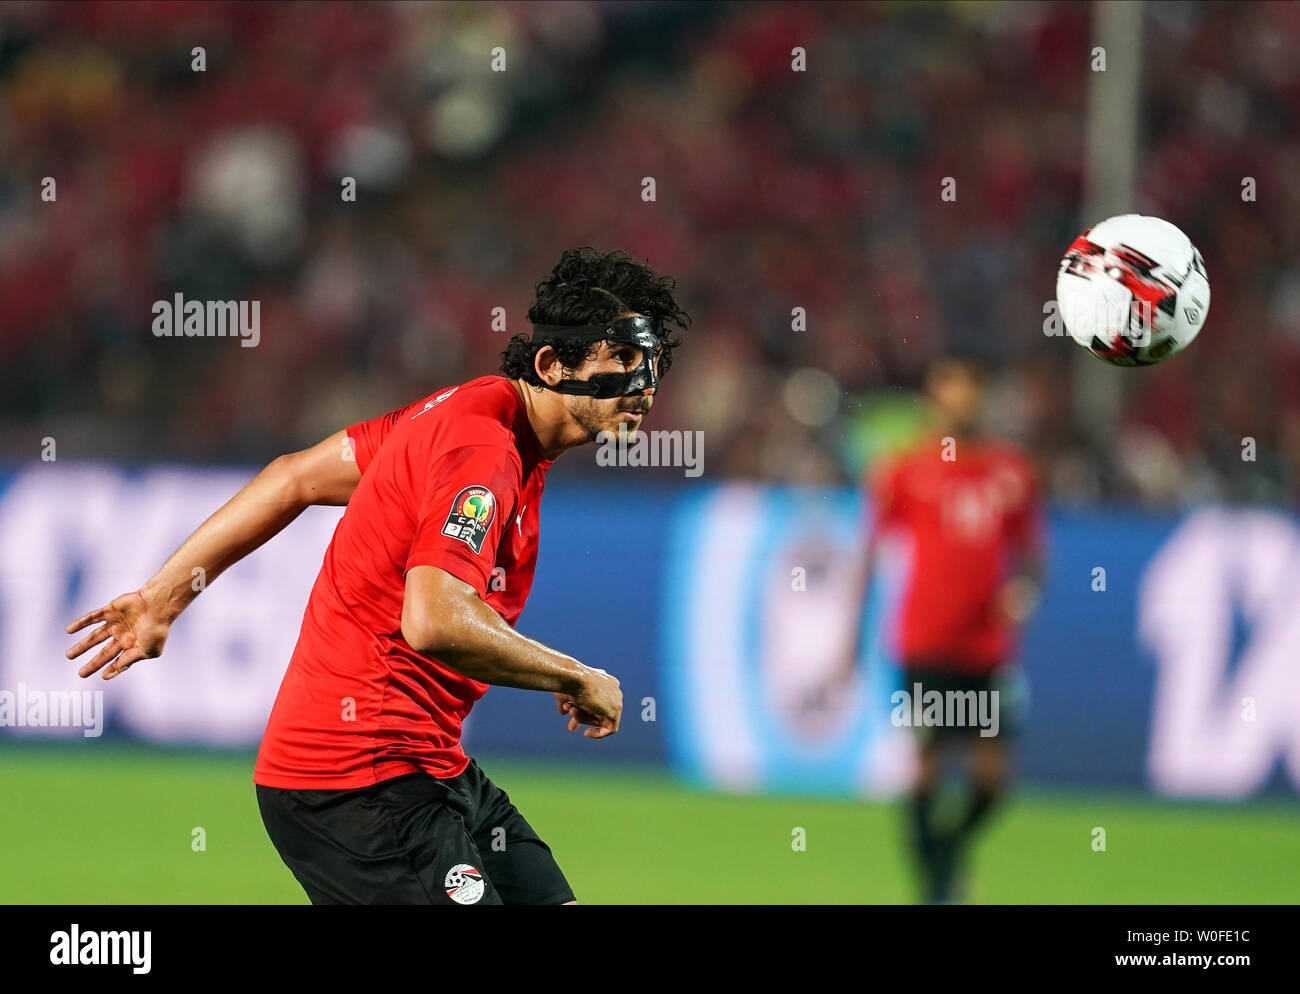 Ahmed Elsayed Elsayed Ali Elsayed Hegazy of Egypt during the 2019 African Cup of Nations match between Egypt and DR Congo at the Cairo International Stadium in Cairo, Egypt on June 26, 2019. Stock Photo